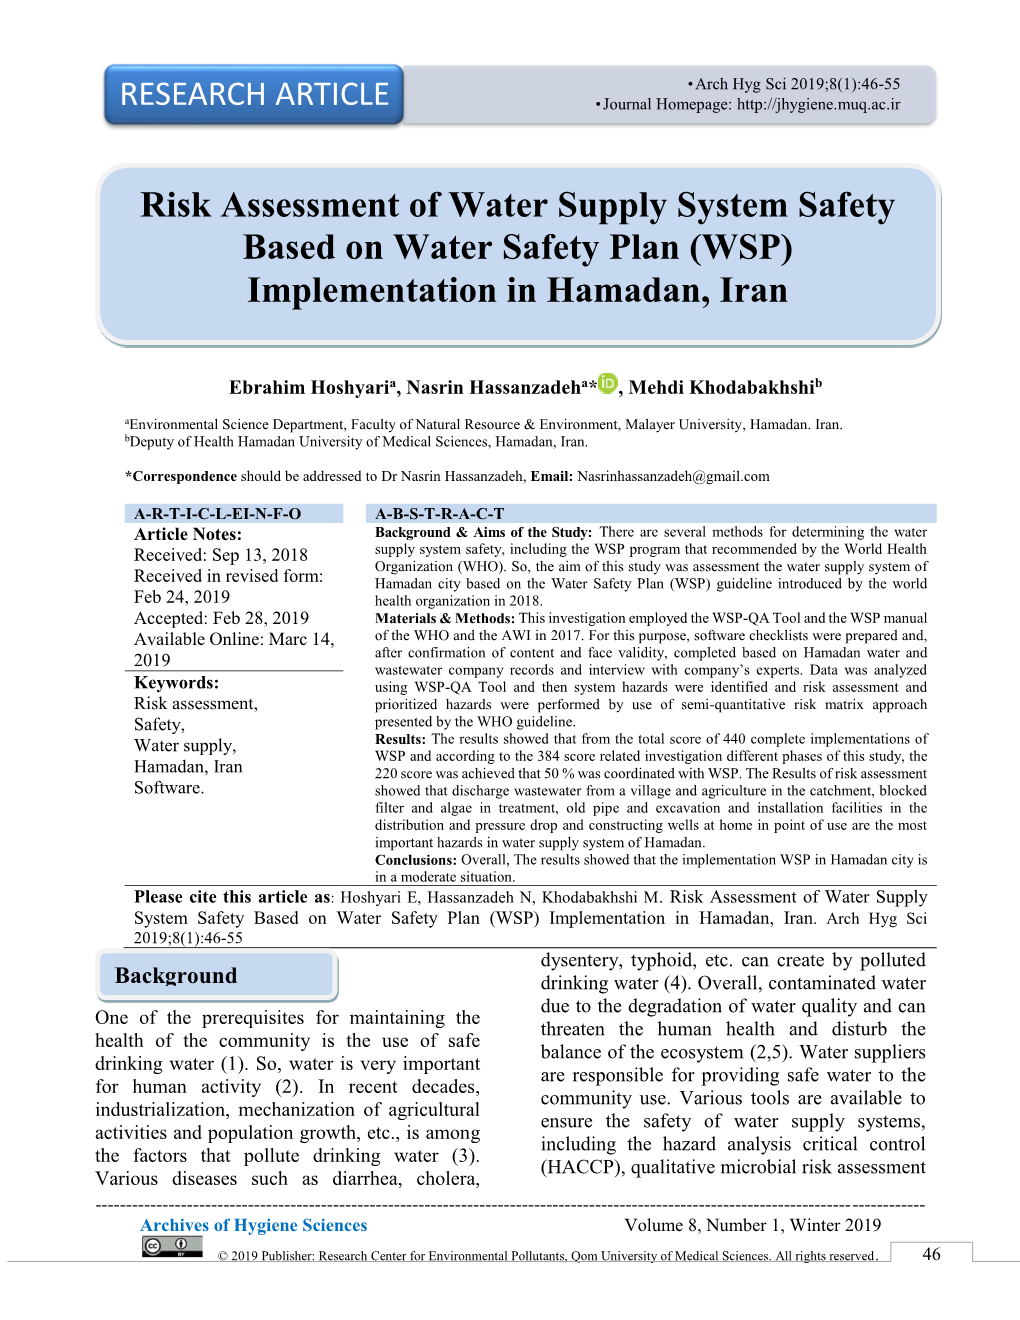 Risk Assessment of Water Supply System Safety Based on Water Safety Plan (WSP) Implementation in Hamadan, Iran